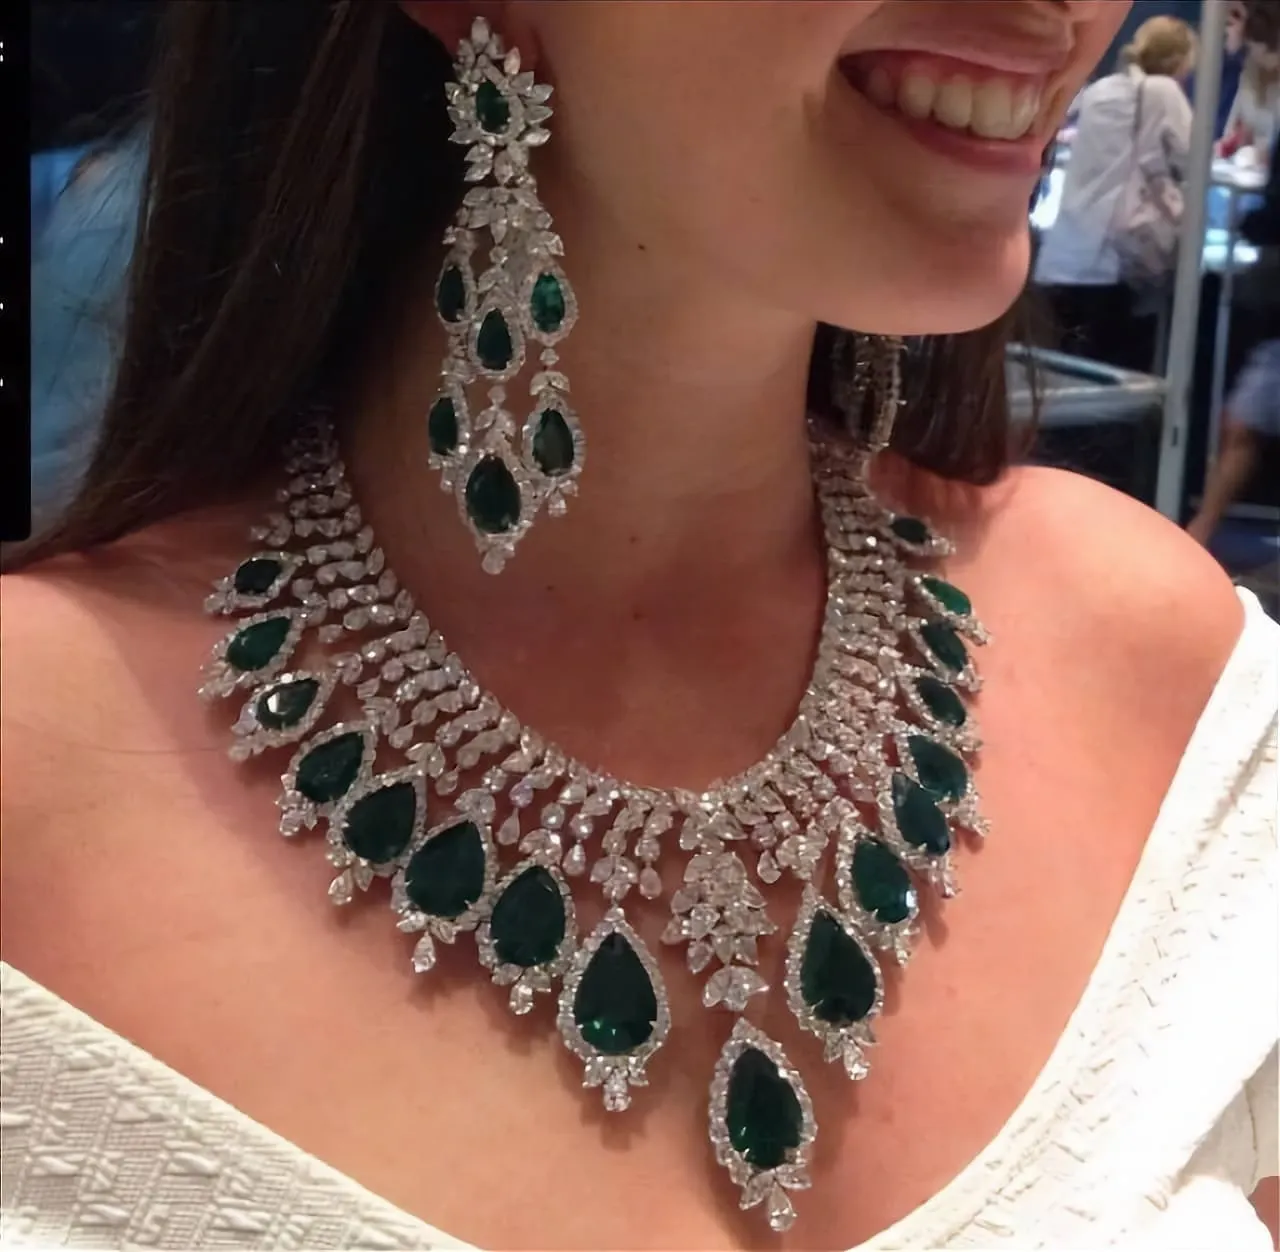 150 Carats Pear Shape Emeralds and 100 Carats Diamonds Marquises, Rounds and Pears - Necklace with Earrings